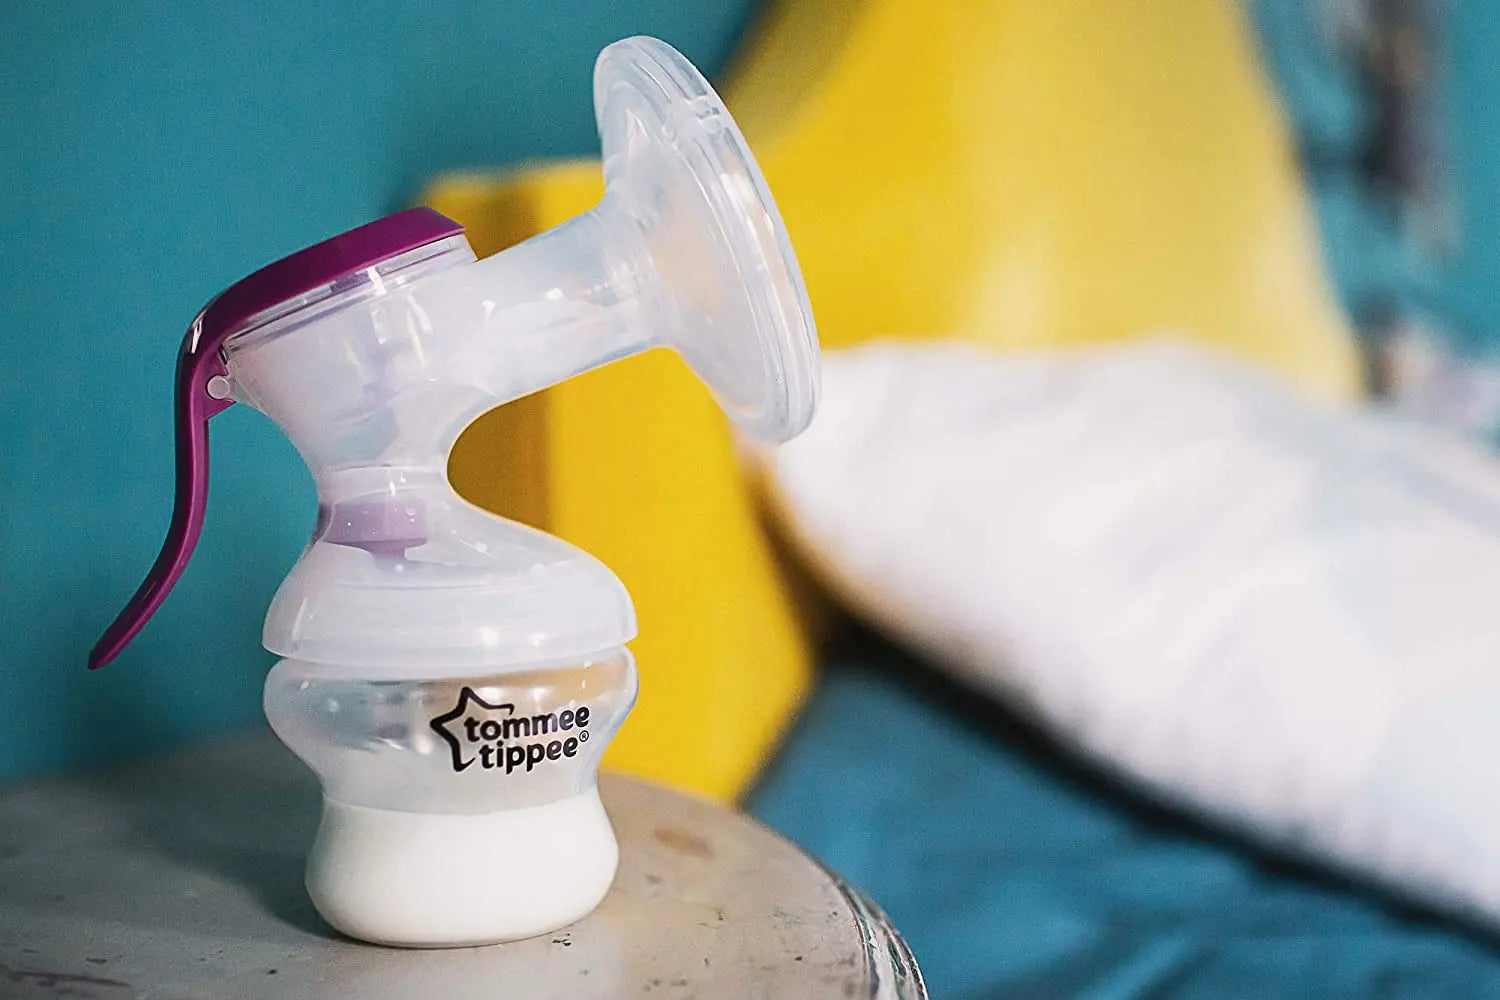 Breast Pumps Tommee Tippee Made for Me Single Manual Breast Pump Tommee Tippee 54.95